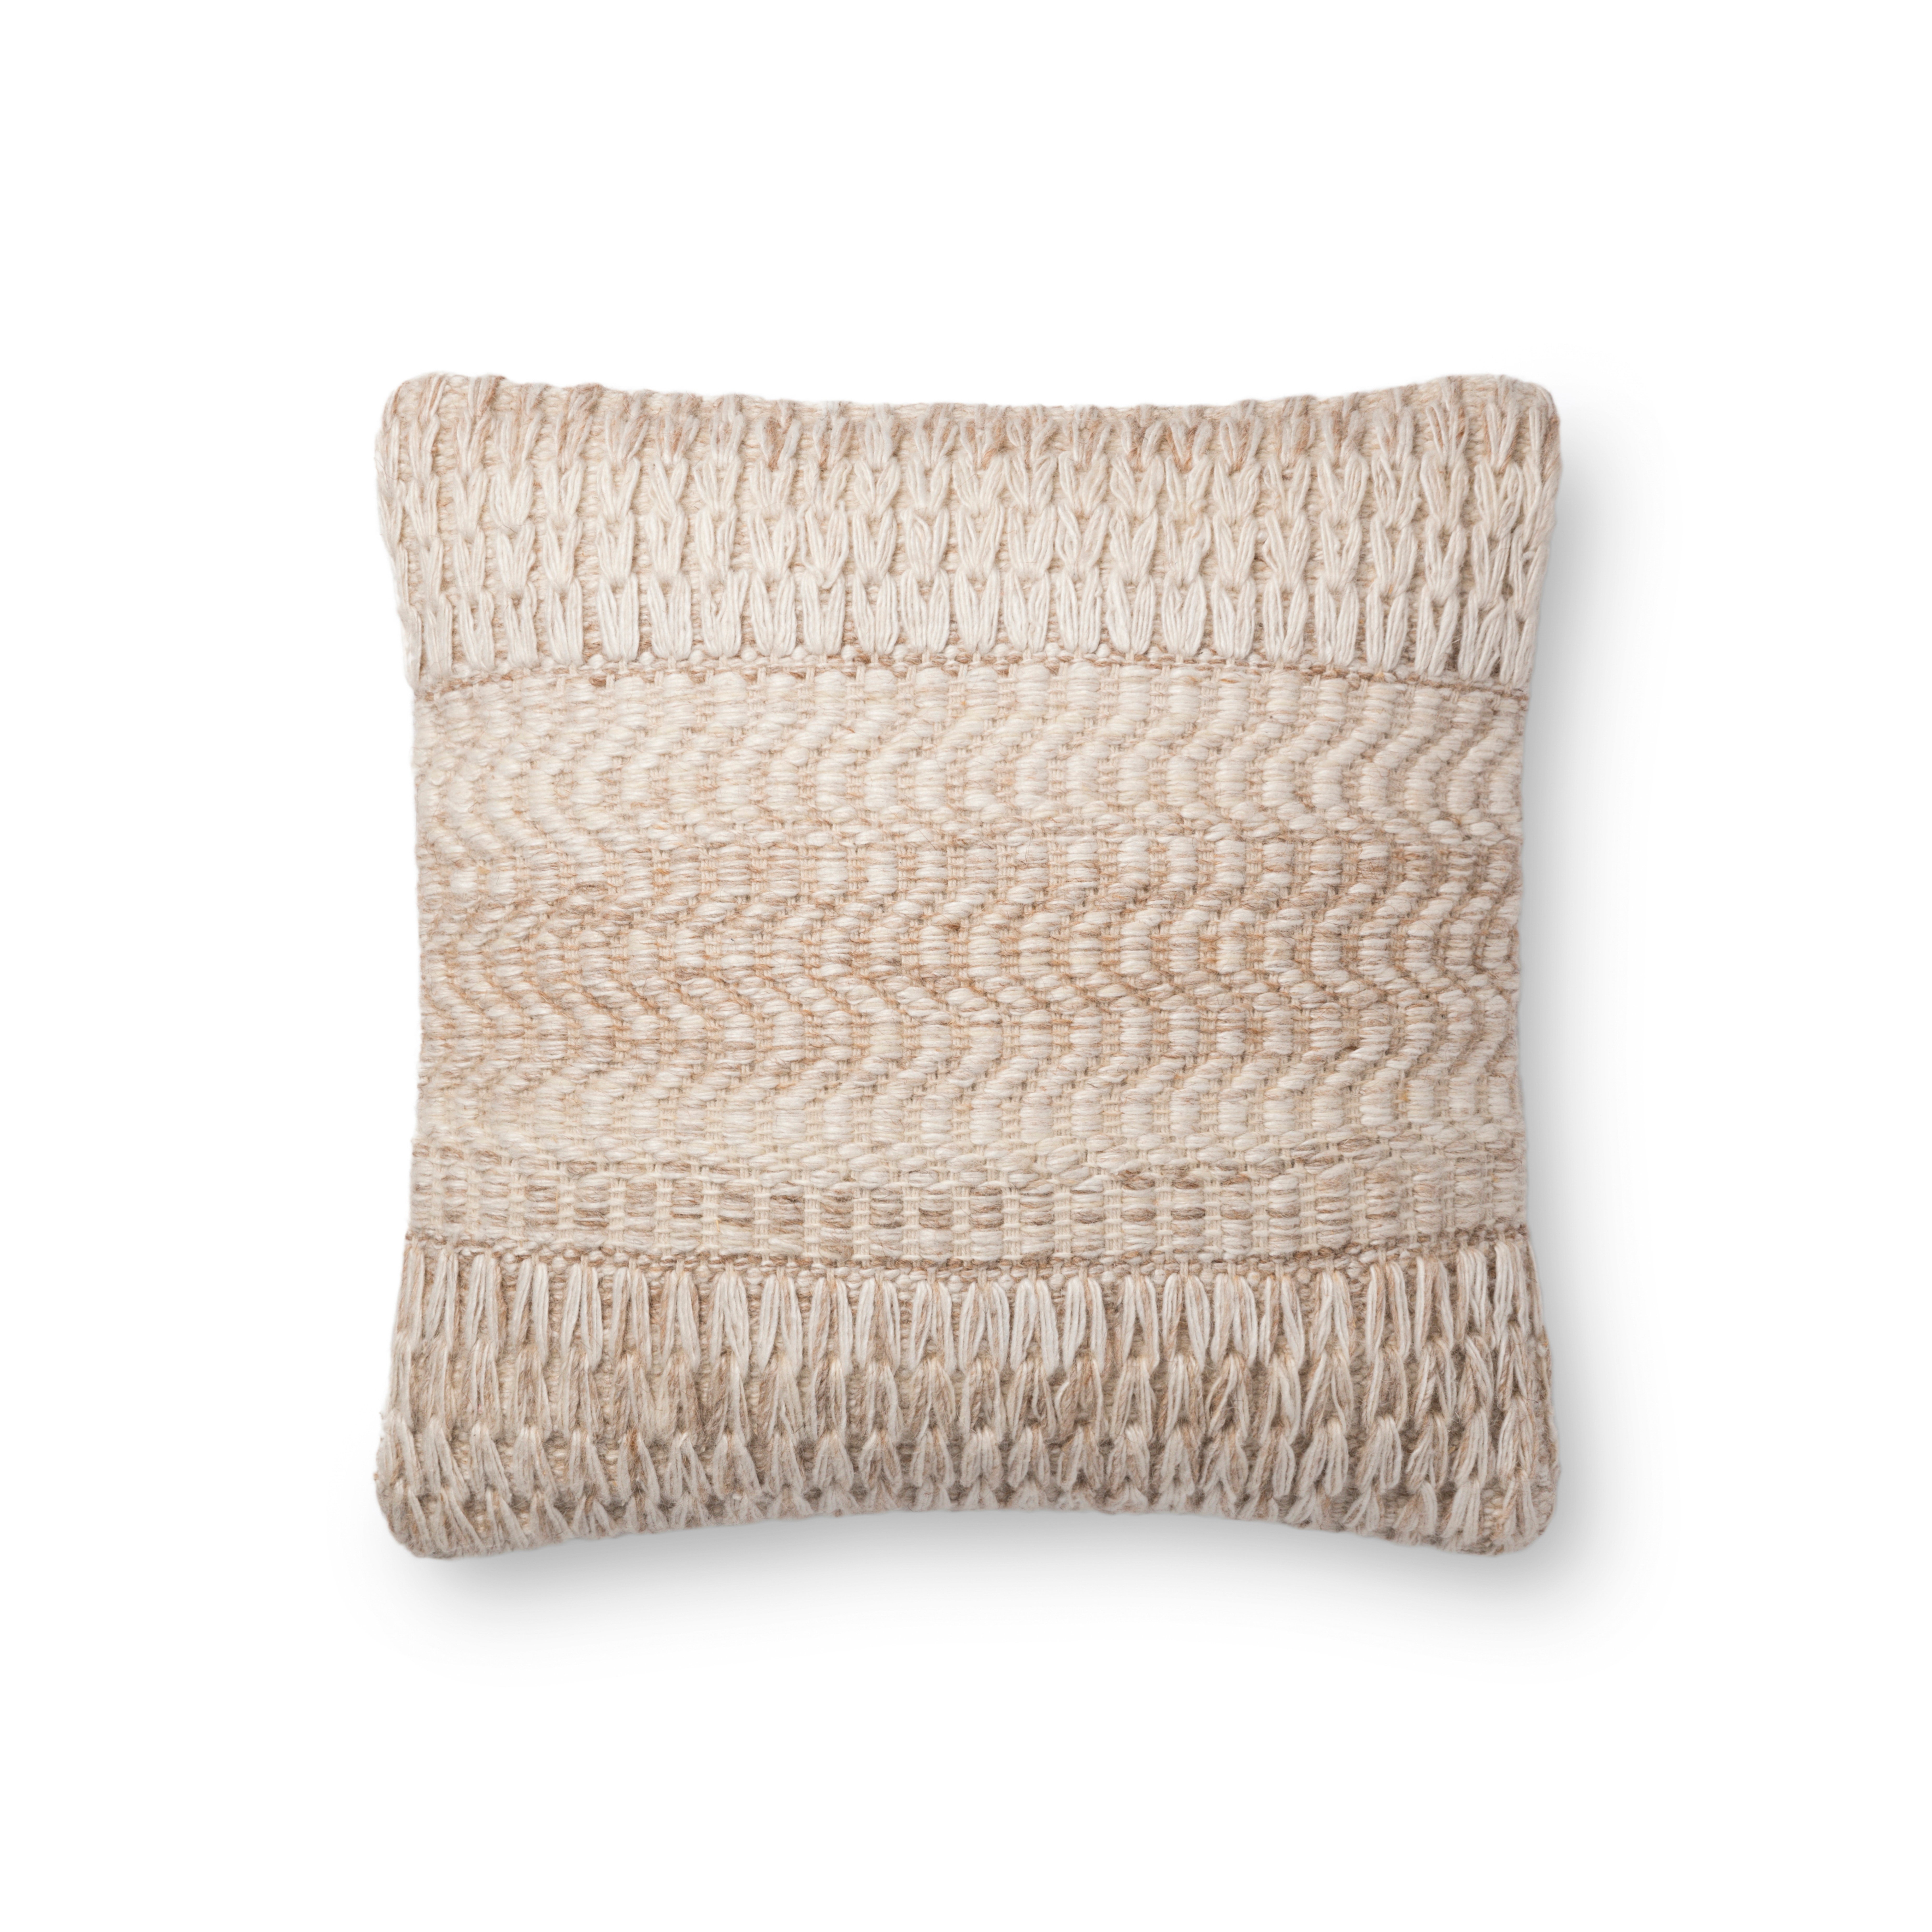 Loloi PILLOWS P0697 Sand 18" x 18" Cover Only - Loma Threads